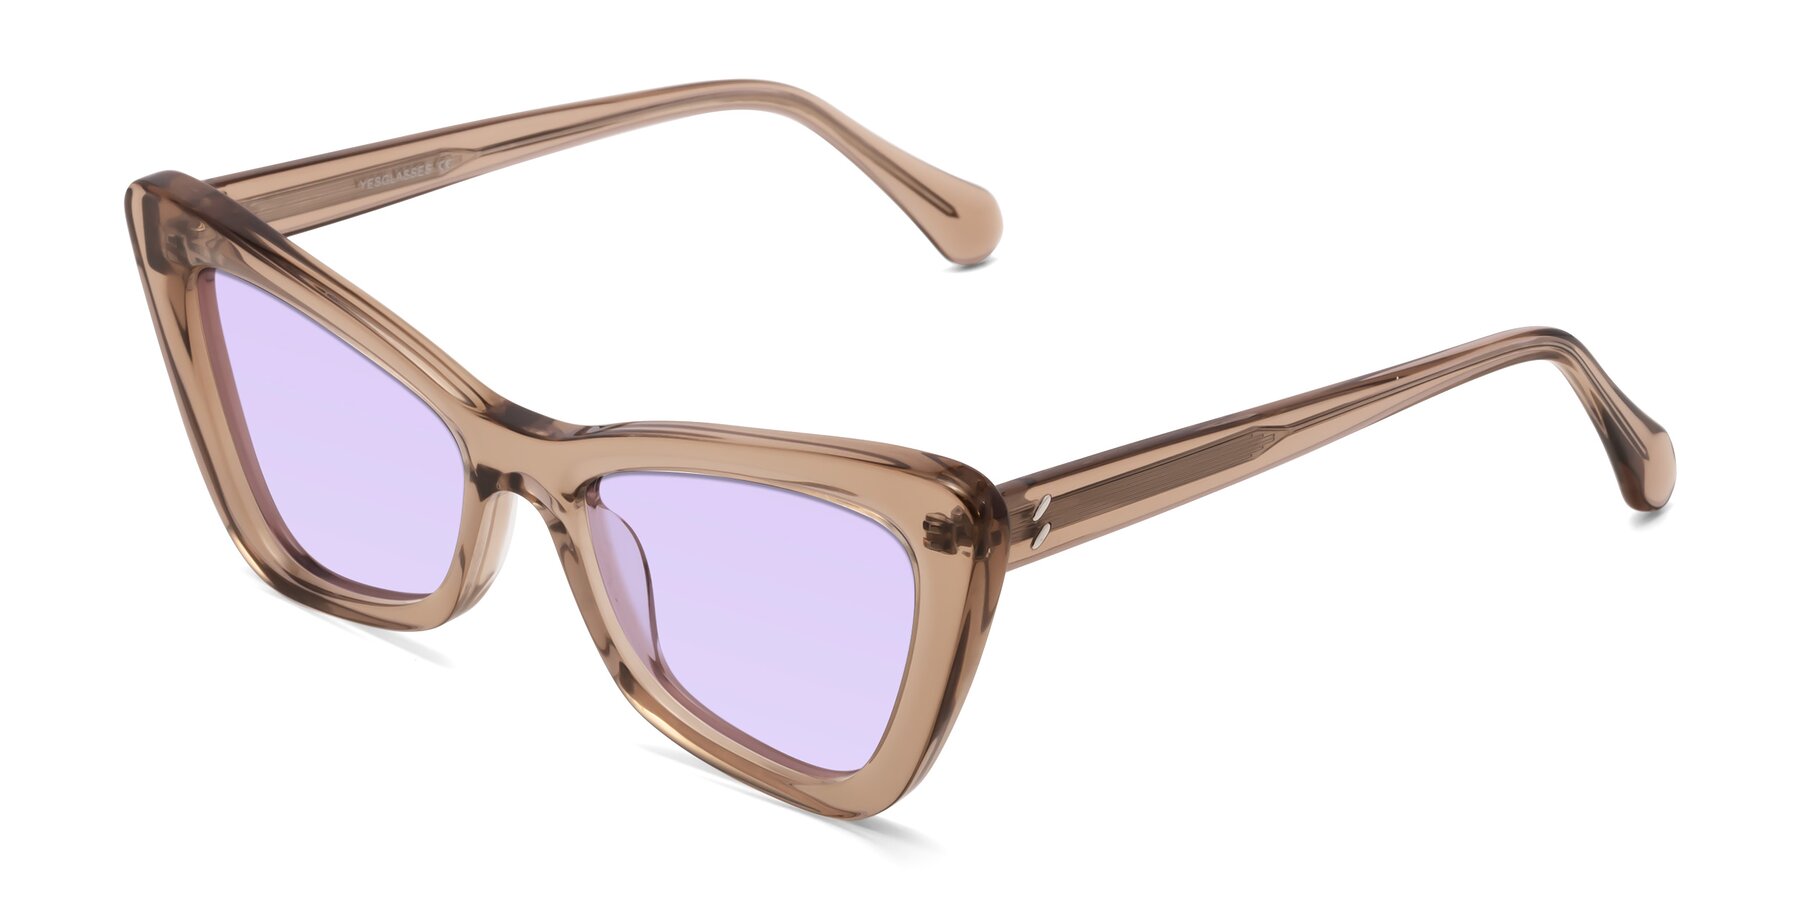 Angle of Rua in Caramel with Light Purple Tinted Lenses